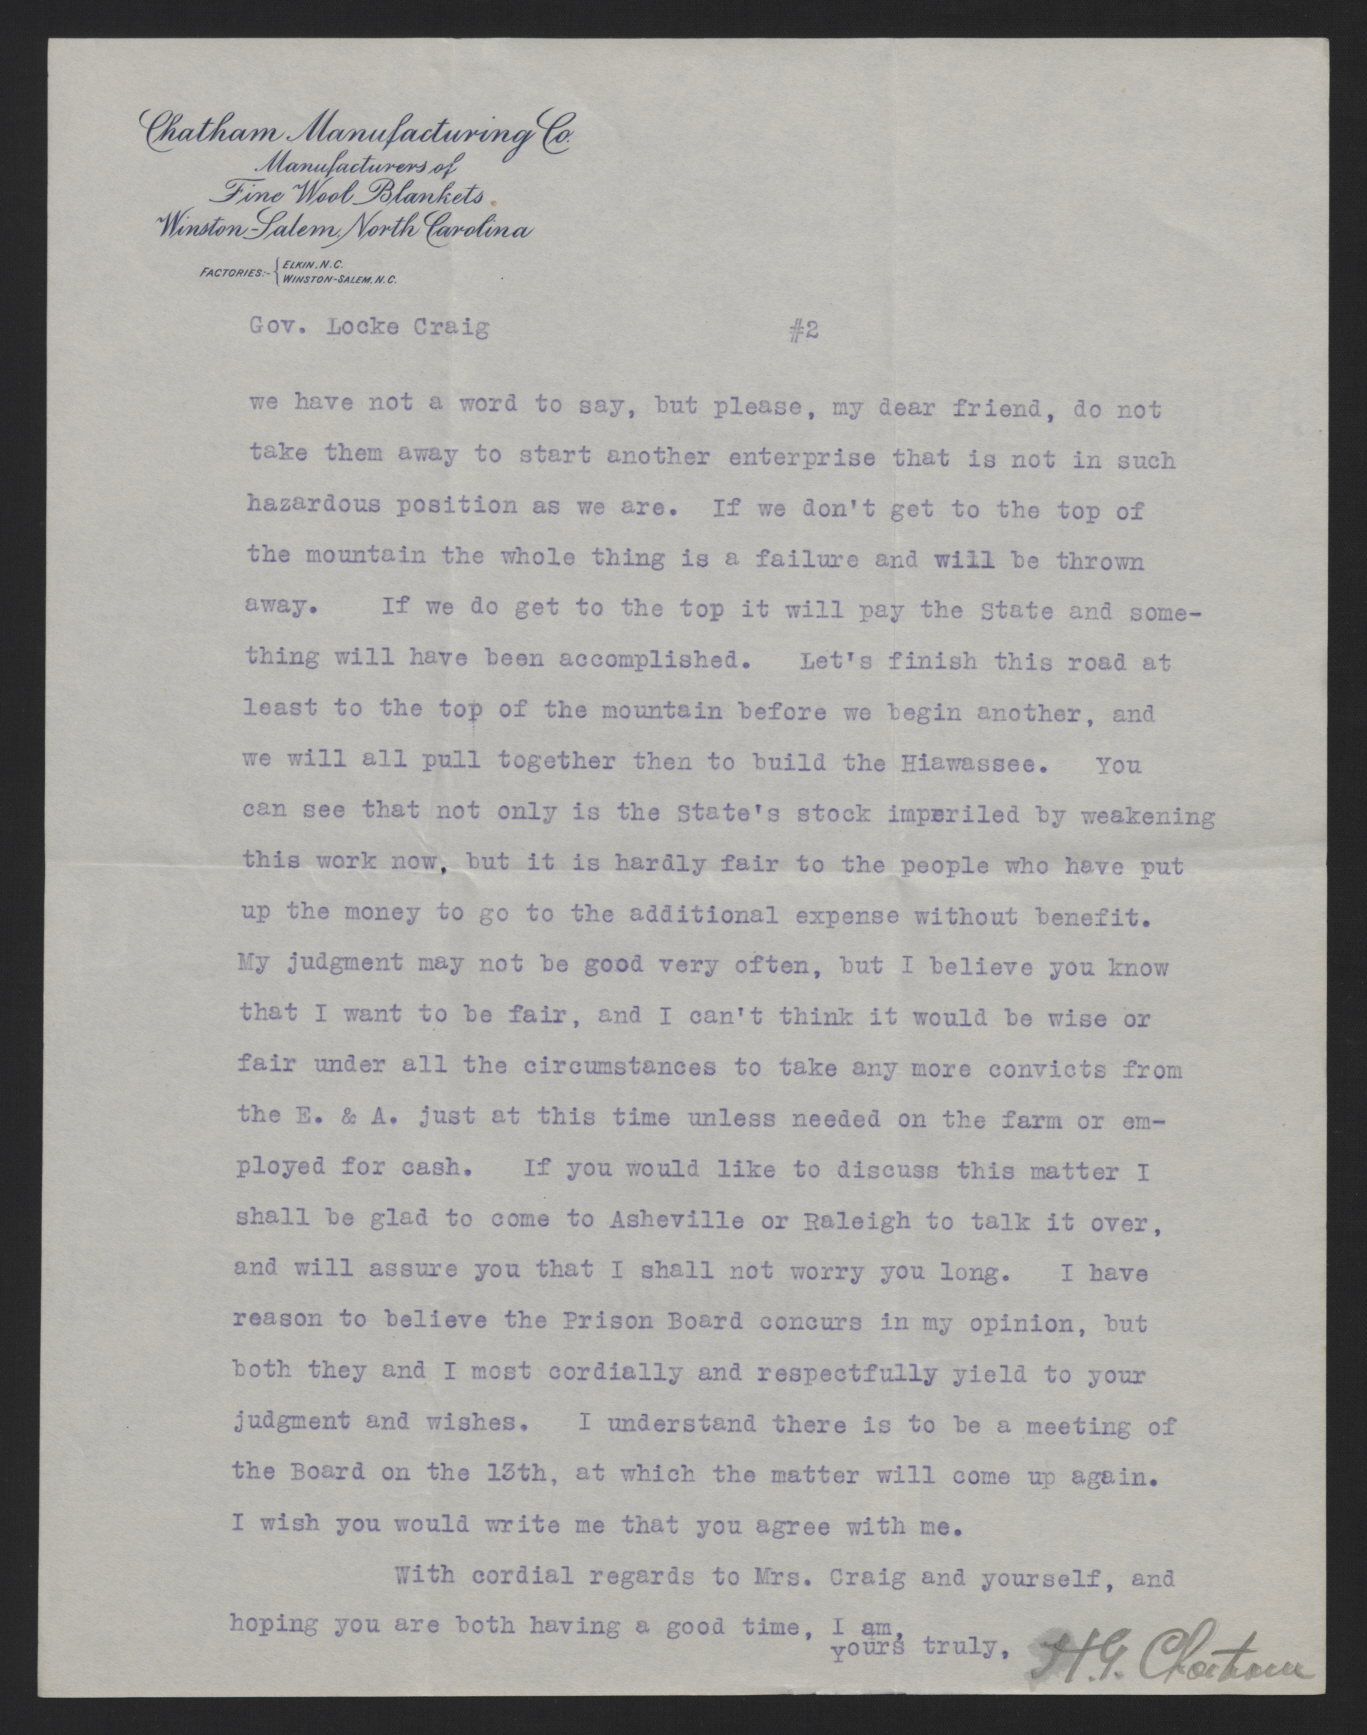 Letter from Chatham to Craig, July 5, 1915, page 2